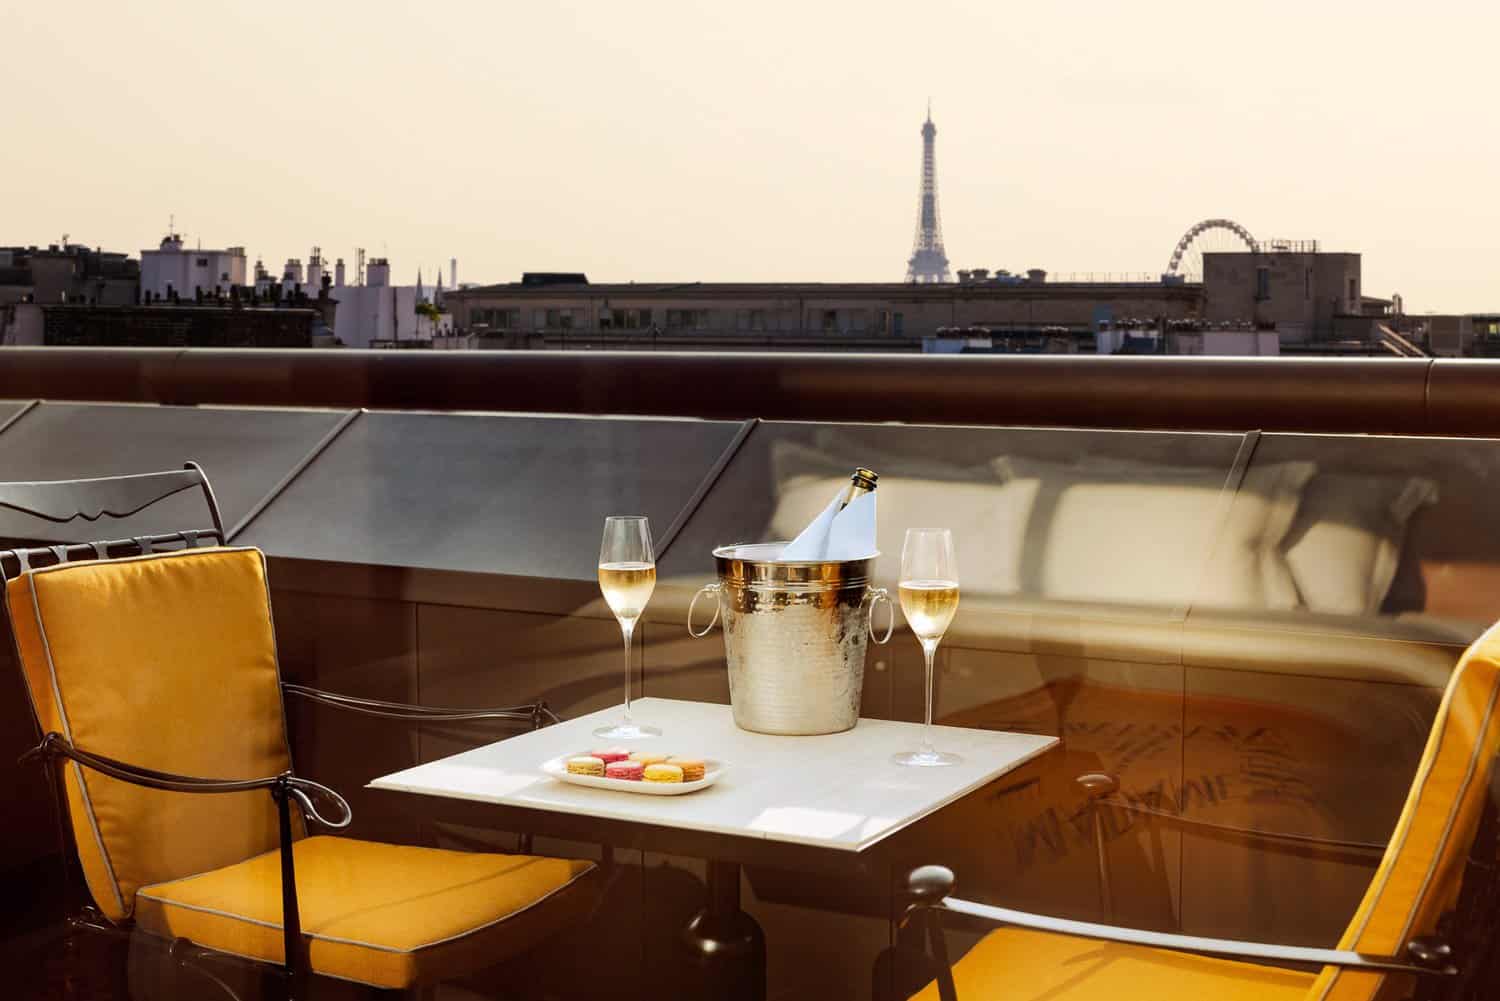 Luxurious relaxation on the Madame Rêve Hotel terrace with a close-up of champagne in a silver bucket, two glasses, and French macarons, overlooking the Eiffel Tower at sunset, symbolizing eco-luxury in Paris.